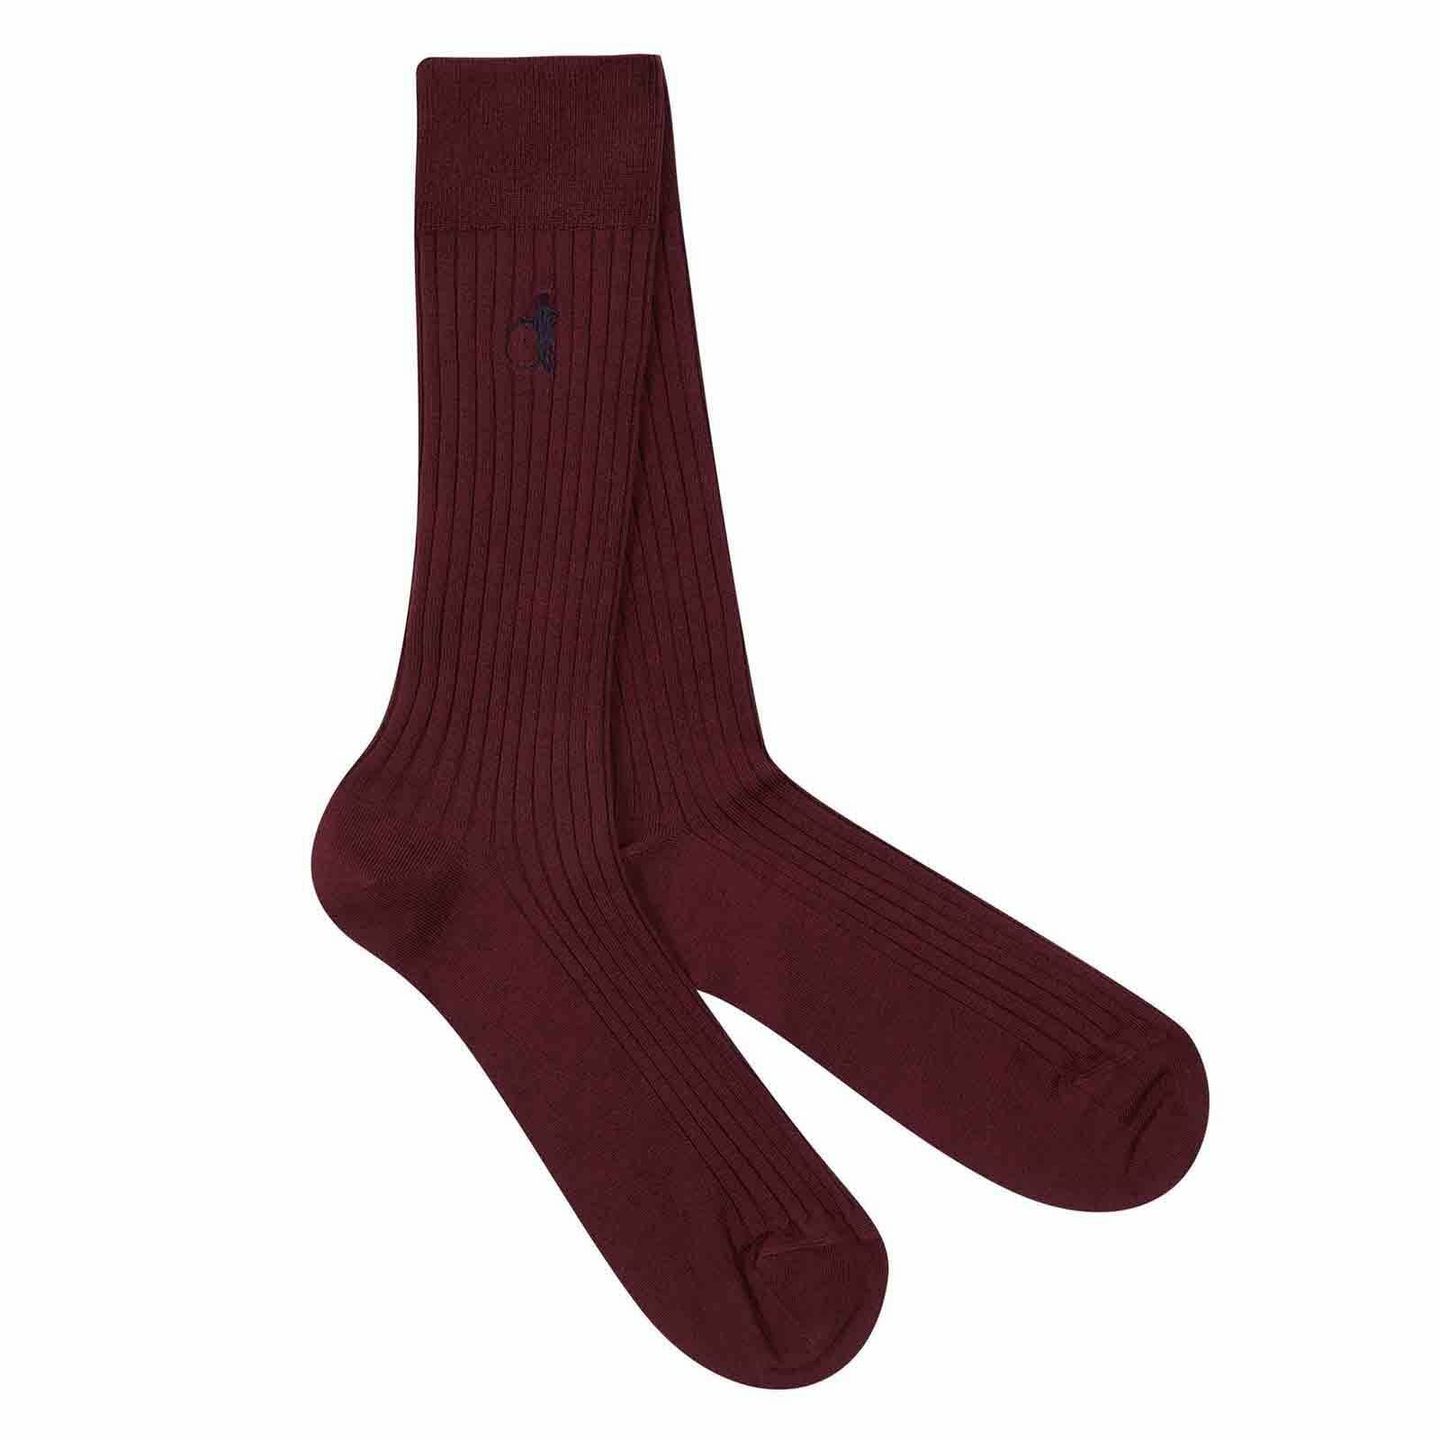 A pair of brown socks with a white background